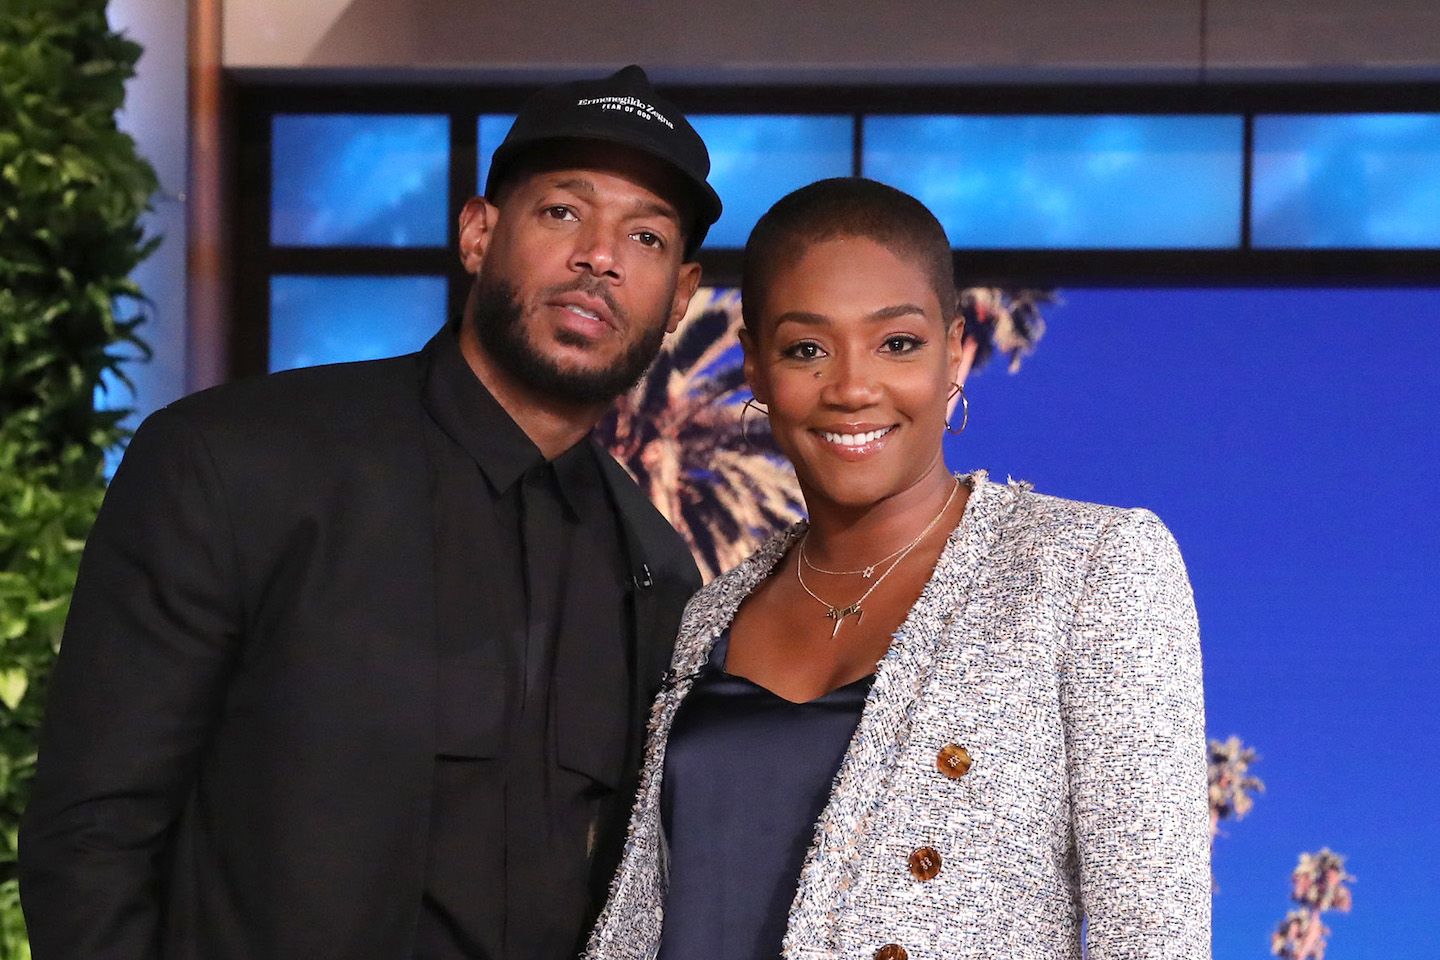 Marlon Wayans Defends Never Casting Tiffany Haddish For Comedies: ‘You Just be Inappropriate’